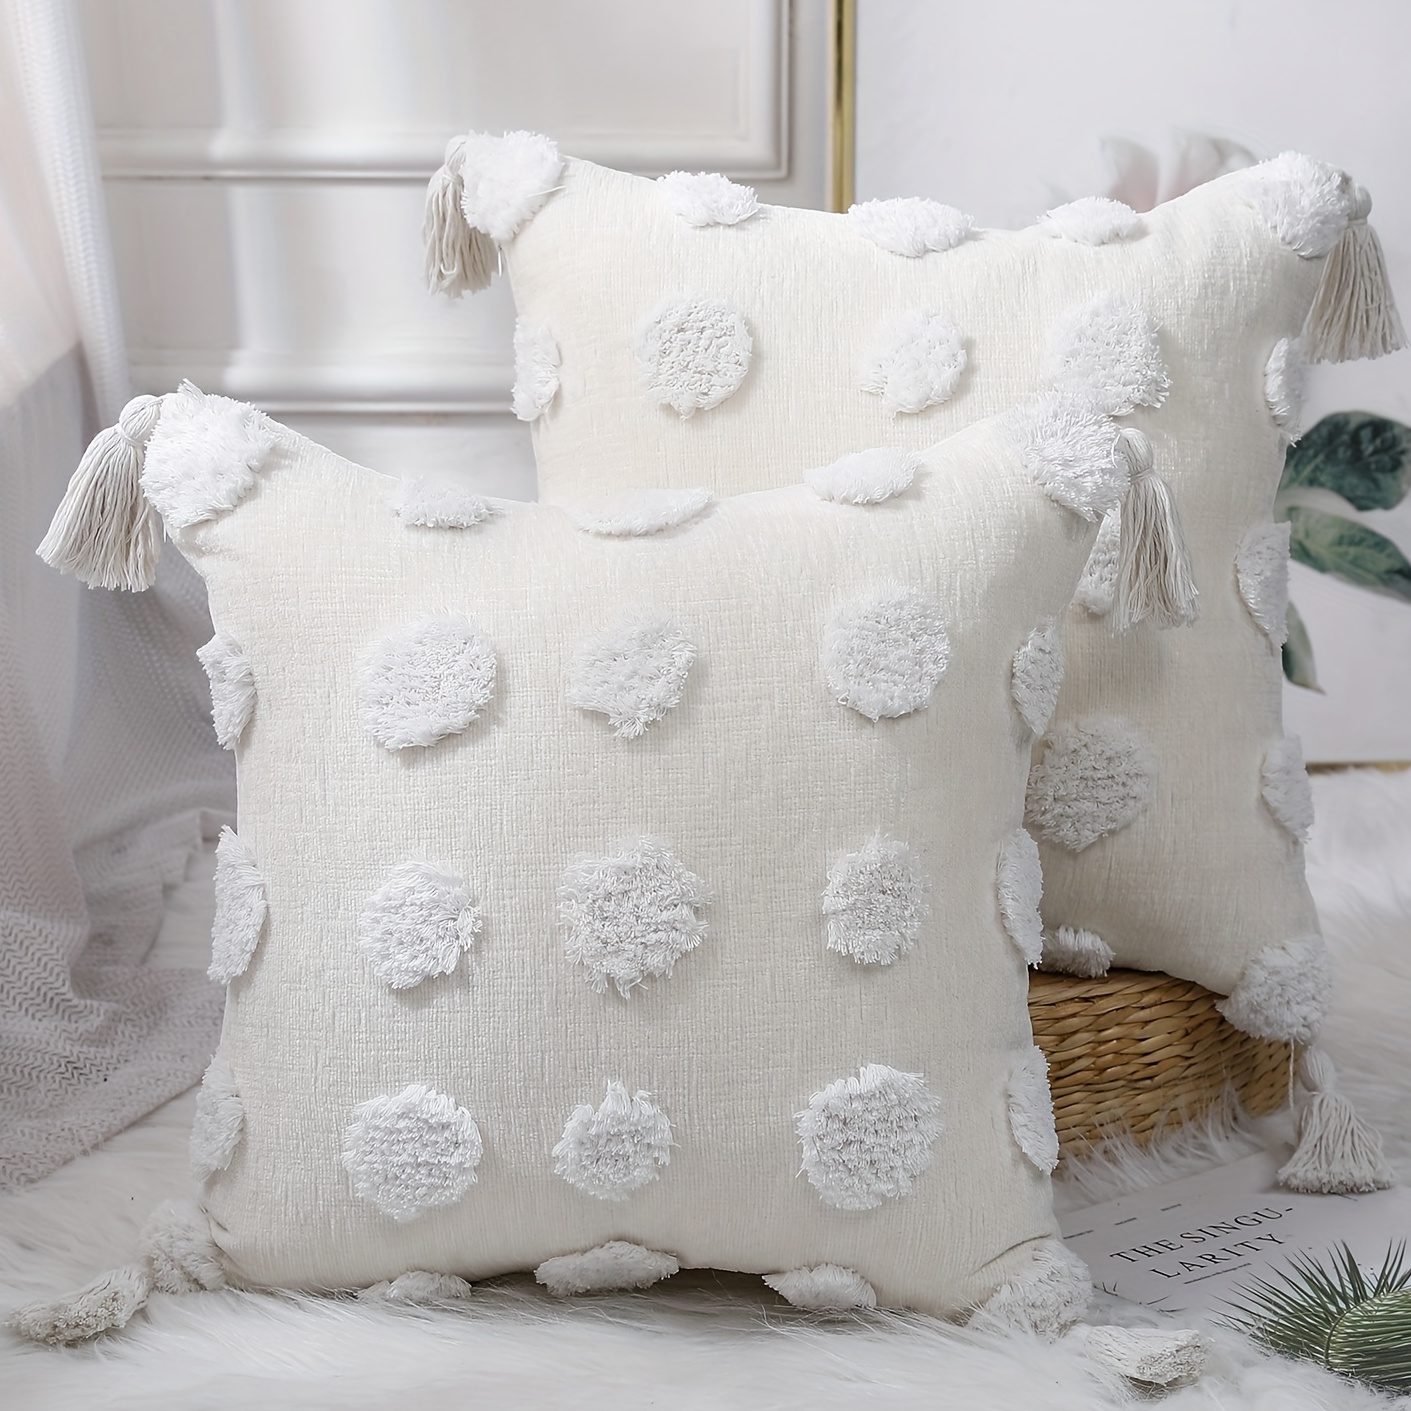 MingBo Boho Cream White Throw Pillow Cover 18x18 Inch, Pom Pom and Tassels  Tufted Decorative Cushion Case Pillow Covers for Bed Couch, 1 PC